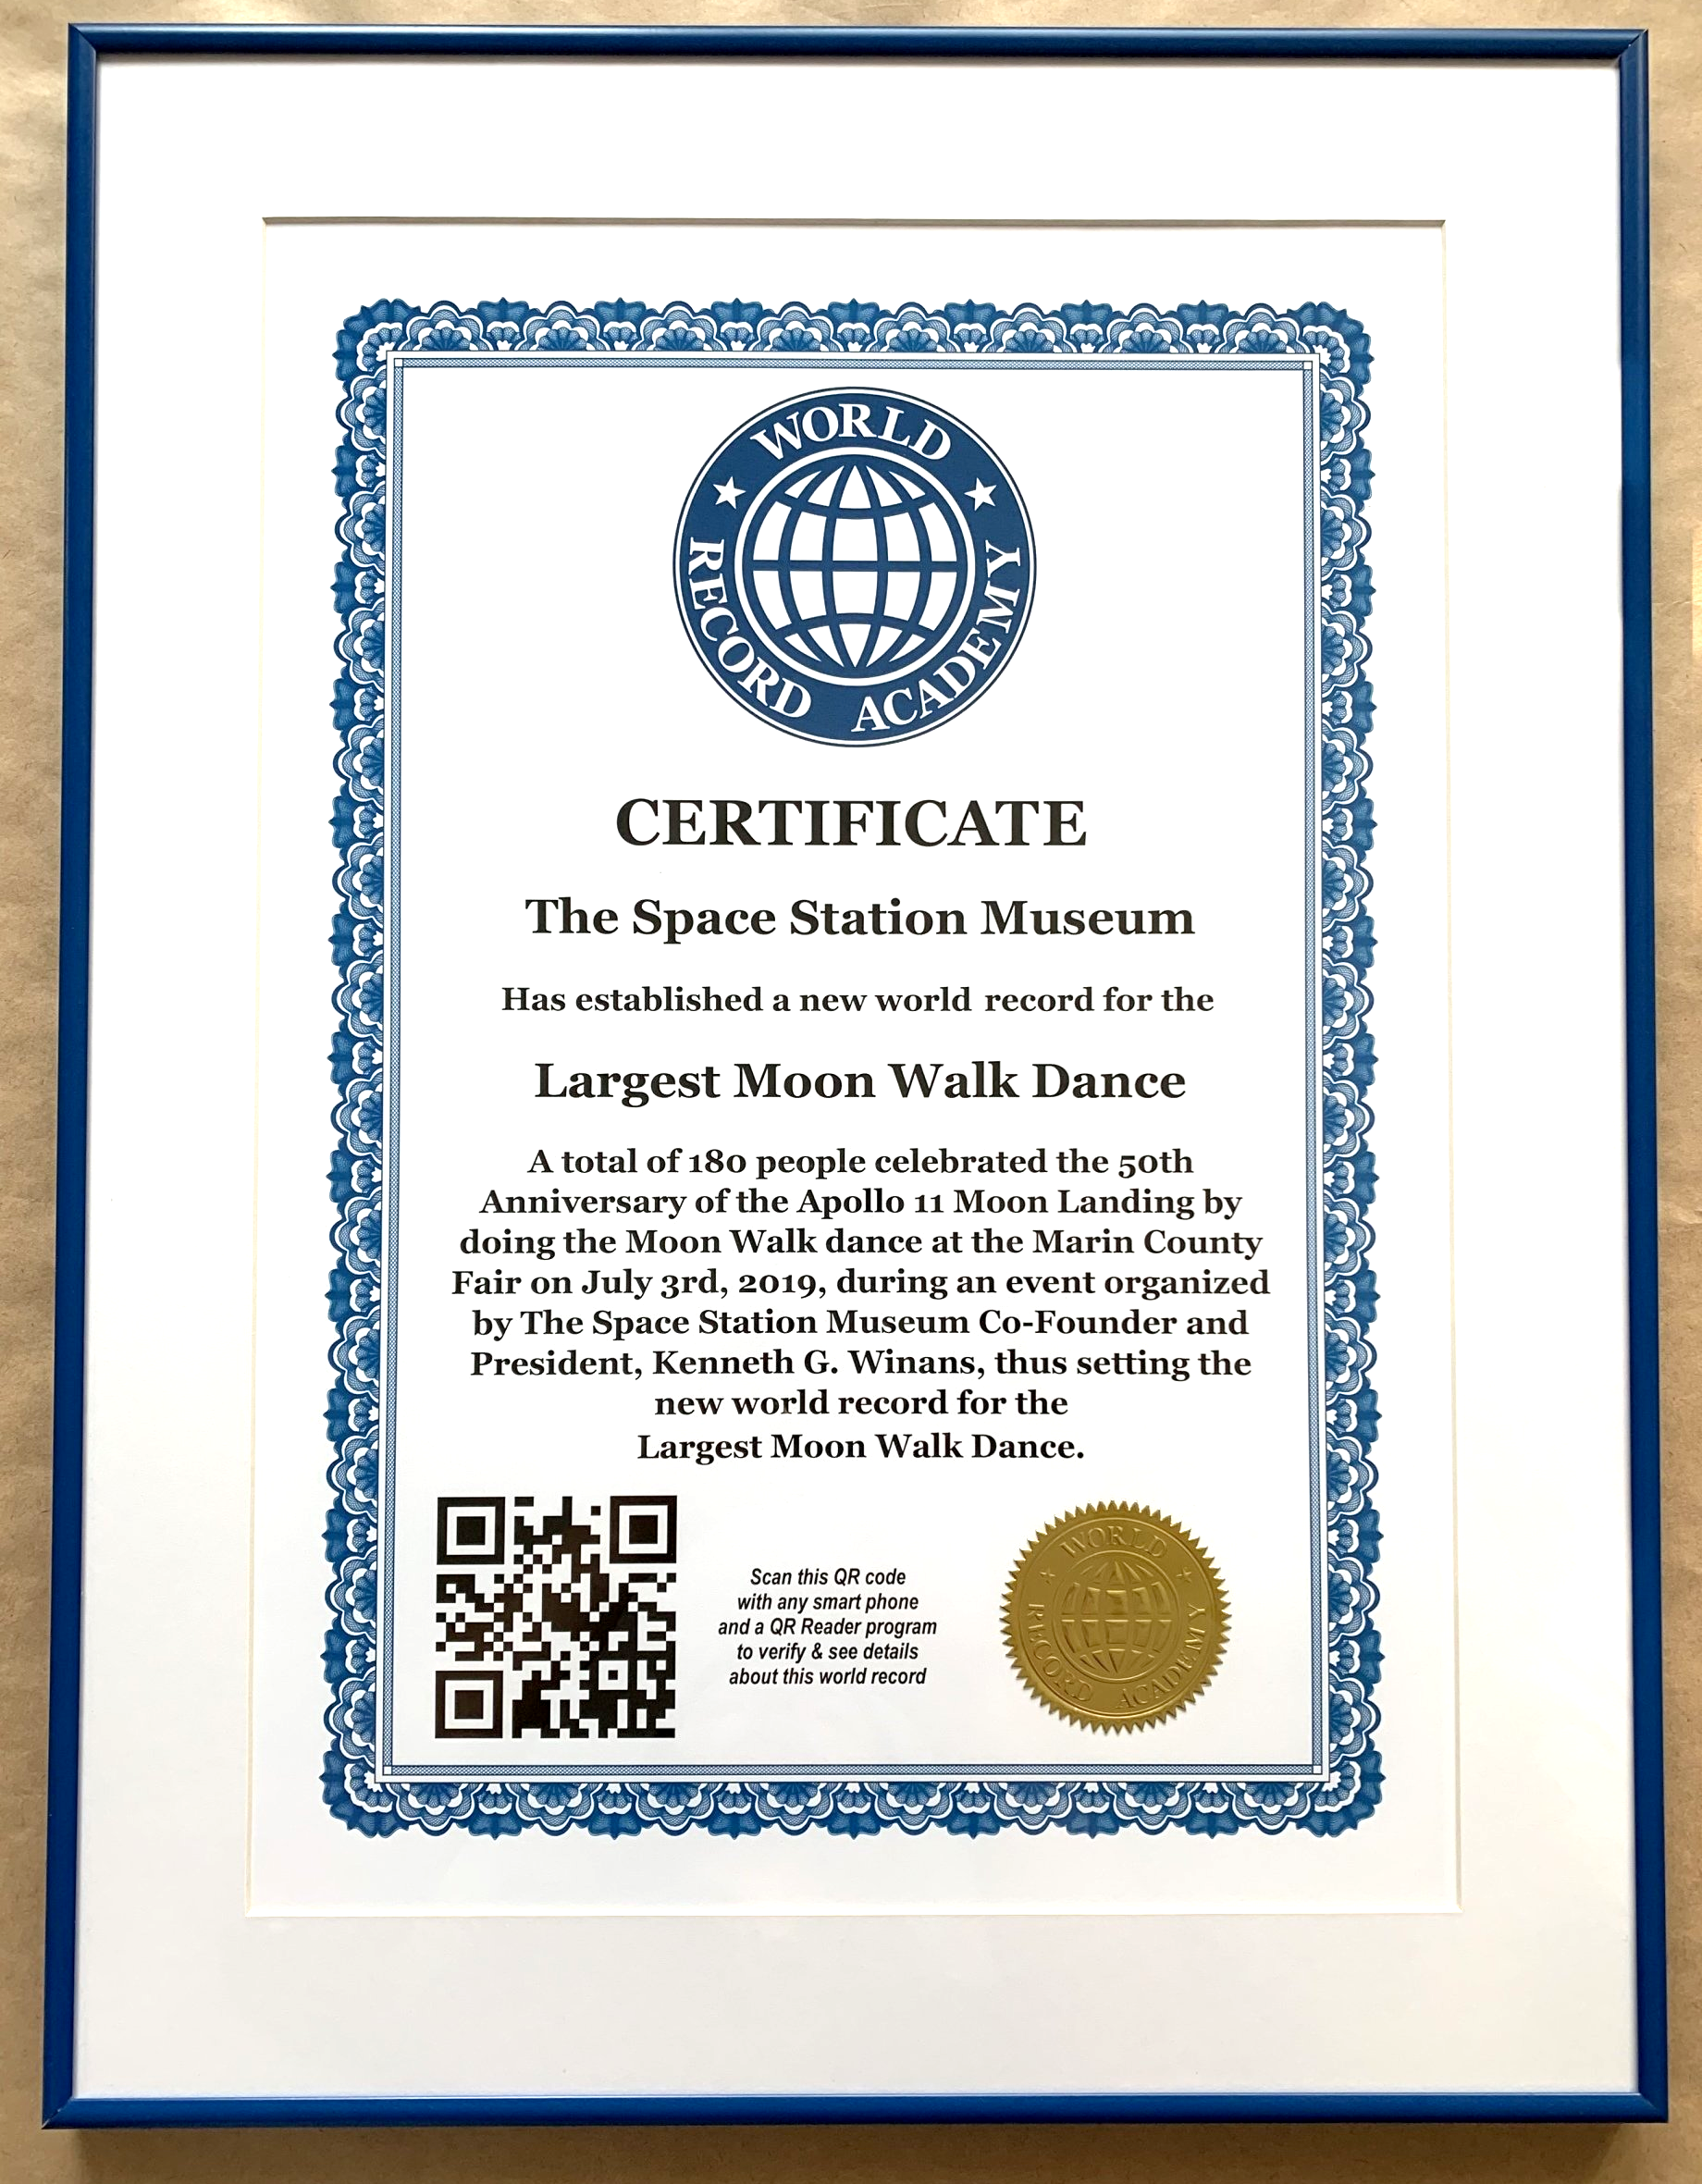 A total of 180 people celebrated the 50th Anniversary of the Apollo 11 moon landing  by doing the Moon Walk dance at the Marin County Fair on July 3rd, 2019, during an event organized by the Space Station Museum, thus setting the new world record for the Largest Moon Walk Dance, according to the World Record Academy.